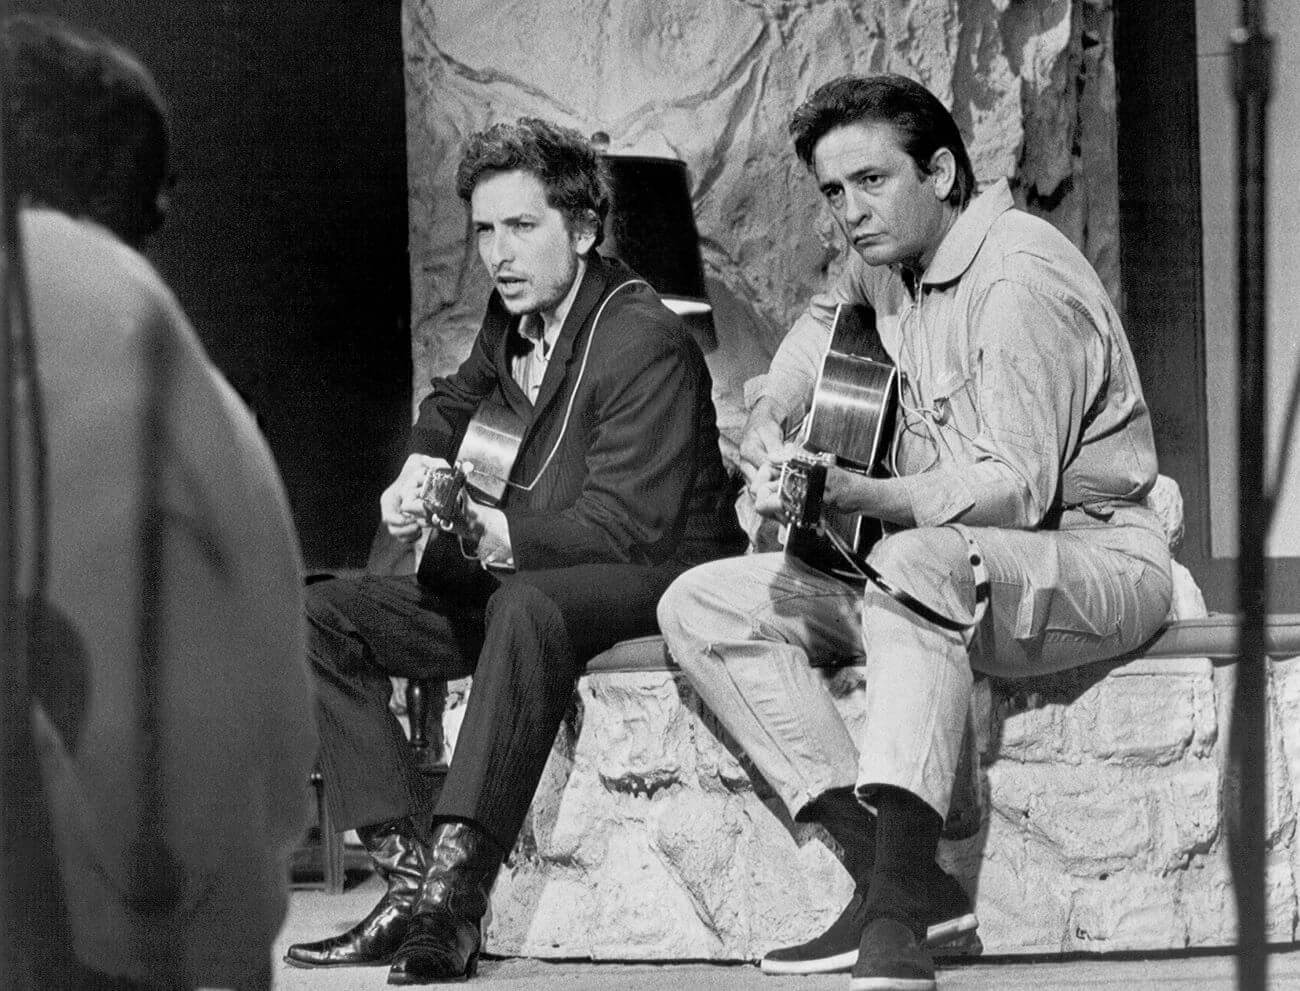 A black and white picture of Bob Dylan and Johnny Cash playing guitars and sitting on a stone bench.